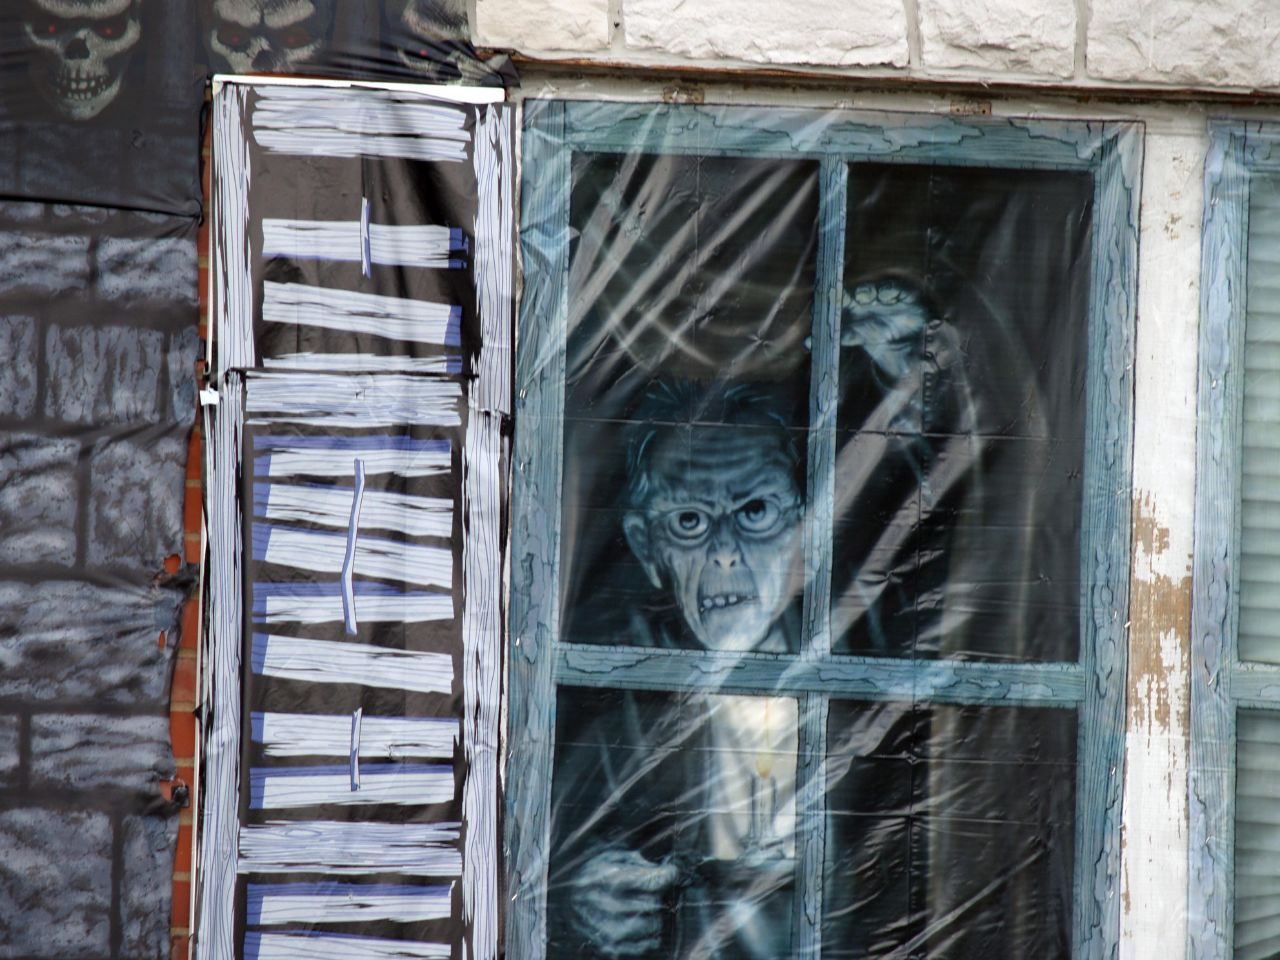 a skeleton doll is sticking out of a window in the street